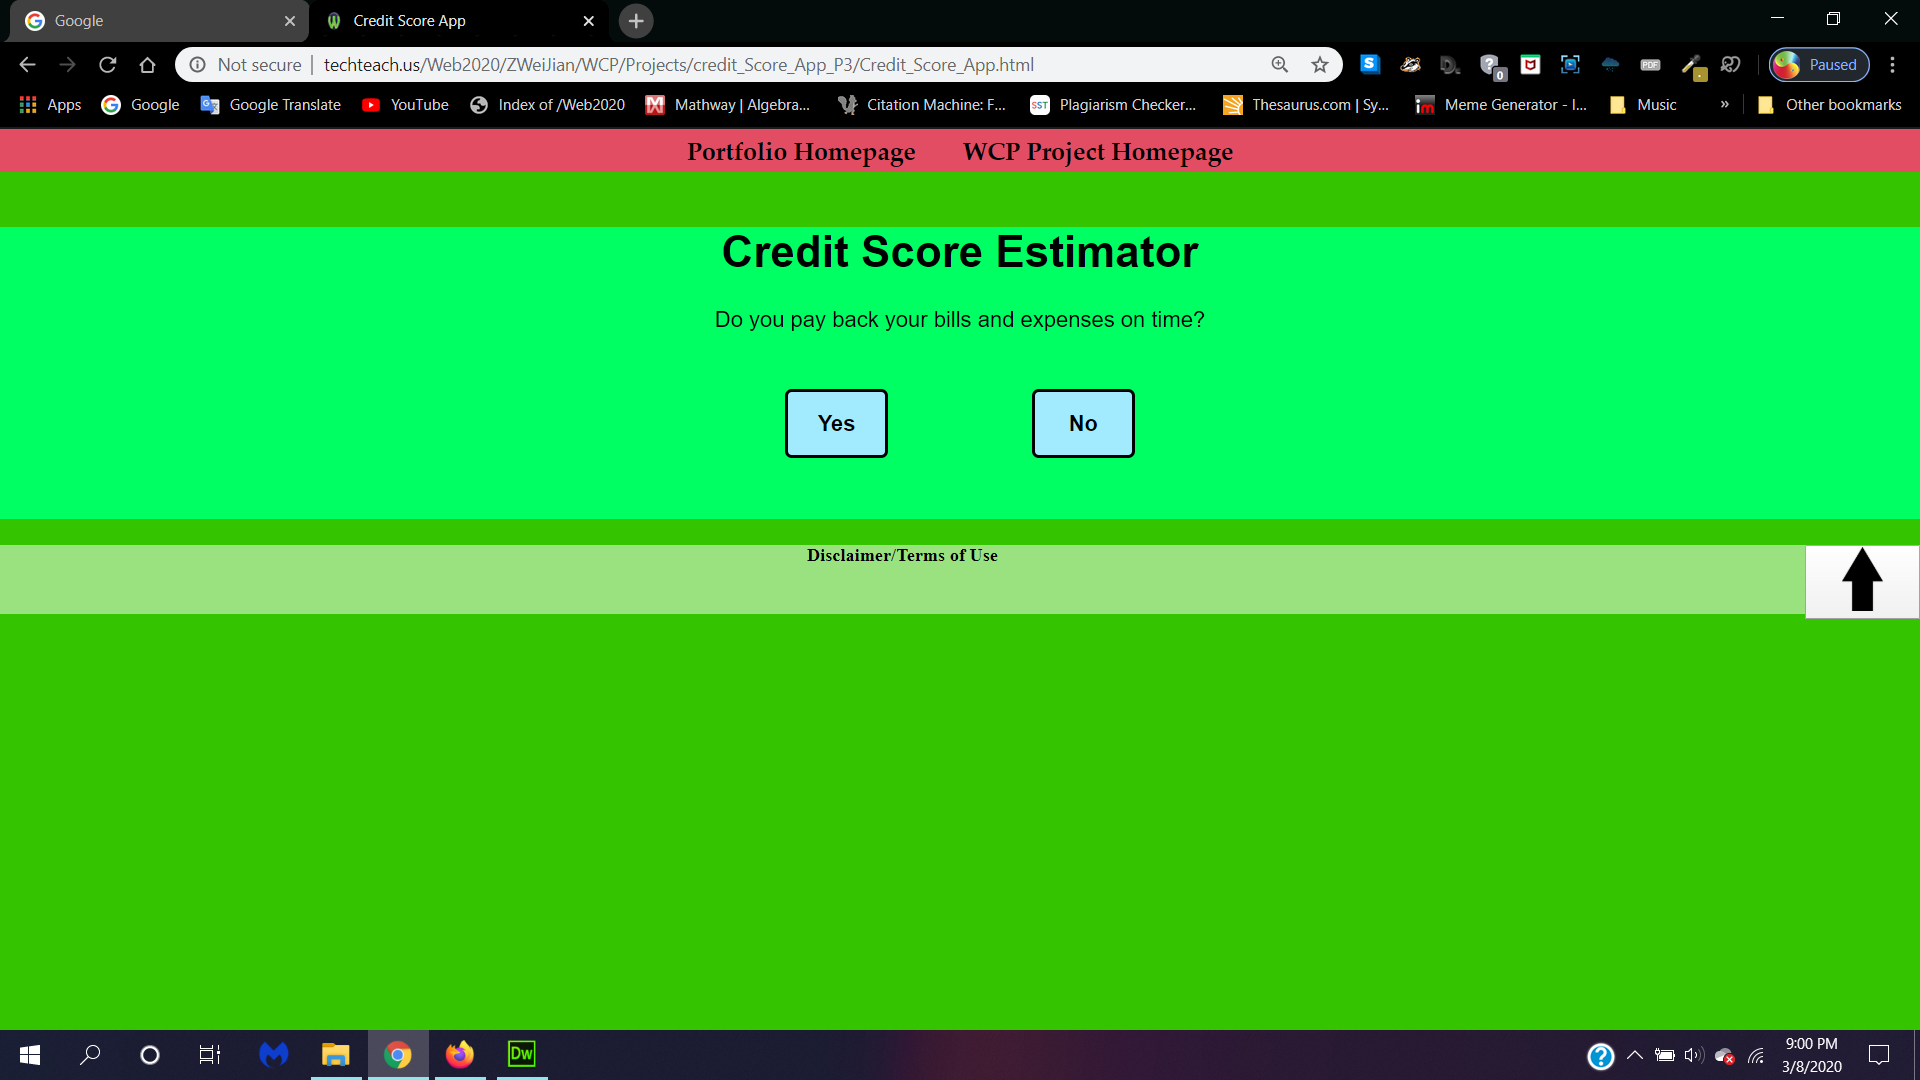 A website/app the estimates the user's credit score in 10 questions.